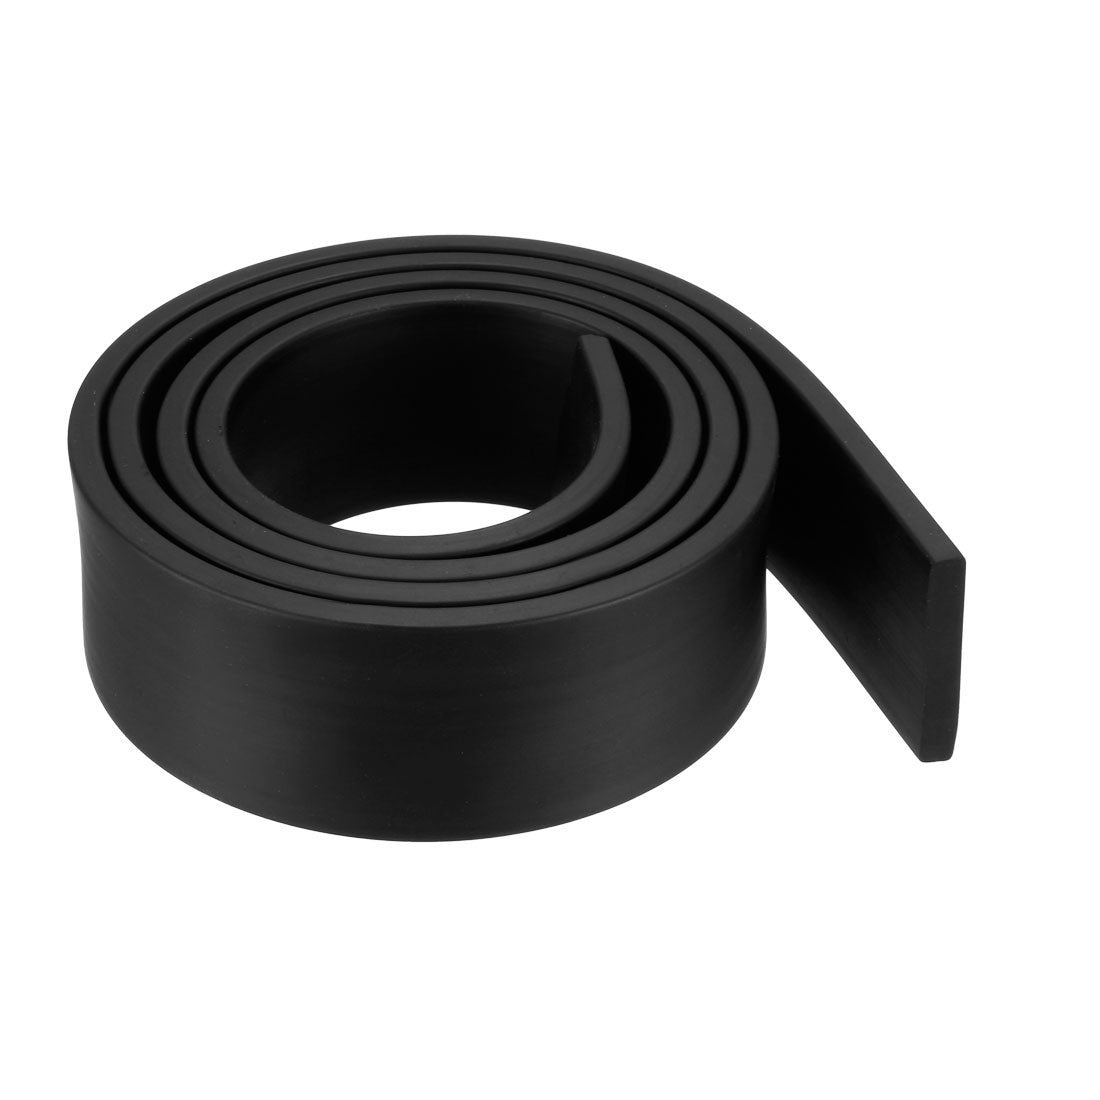 uxcell Uxcell Solid Rectangle Rubber Seal Strip 35mm Wide 5mm Thick, 1 Meter Long Black